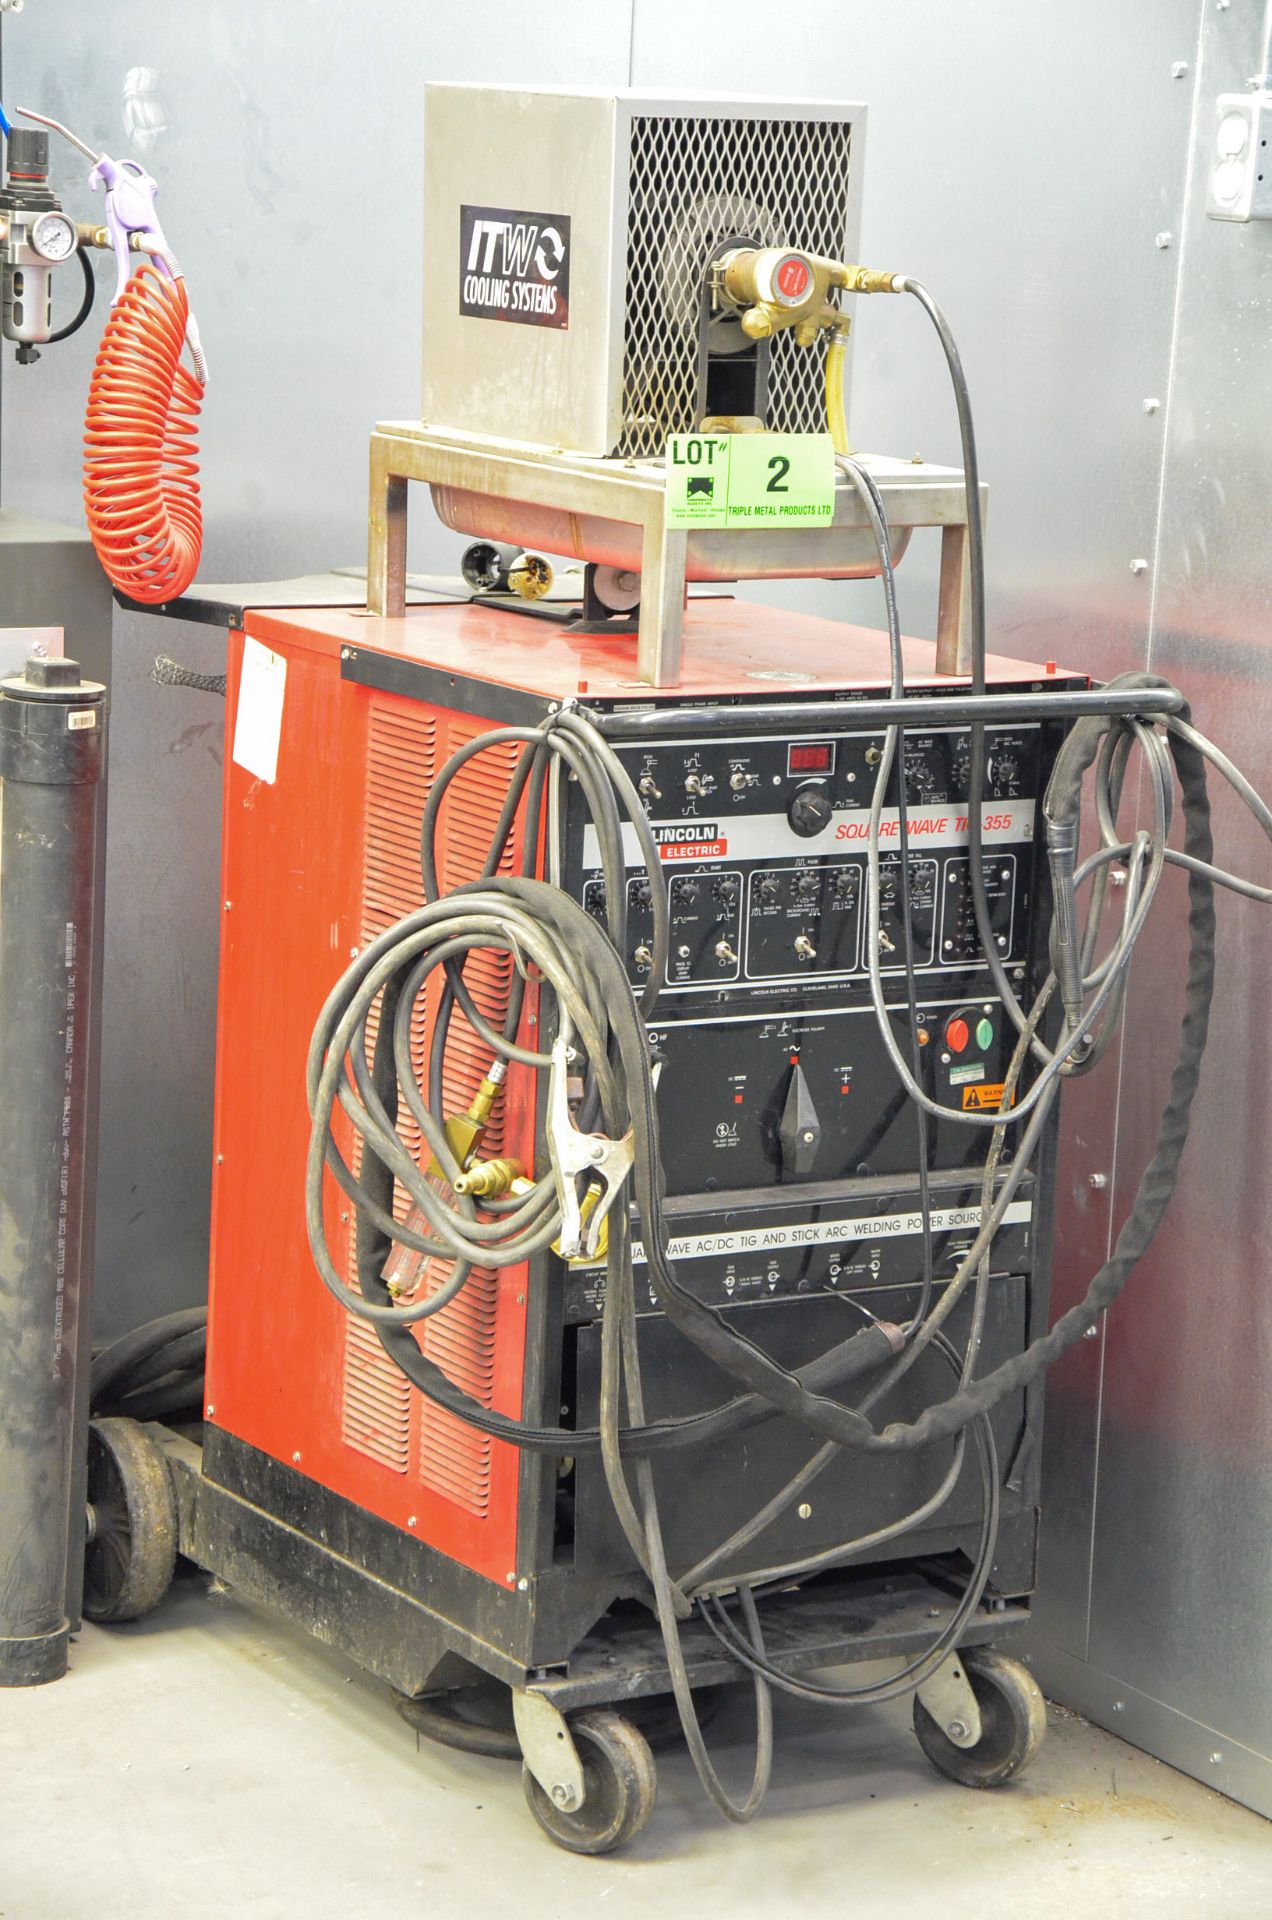 LINCOLN ELECTRIC SQUARE WAVE TIG-355 DIGITAL TIG WELDER WITH CABLES & GUN, ITW COOLING SYSTEMS - Image 2 of 4